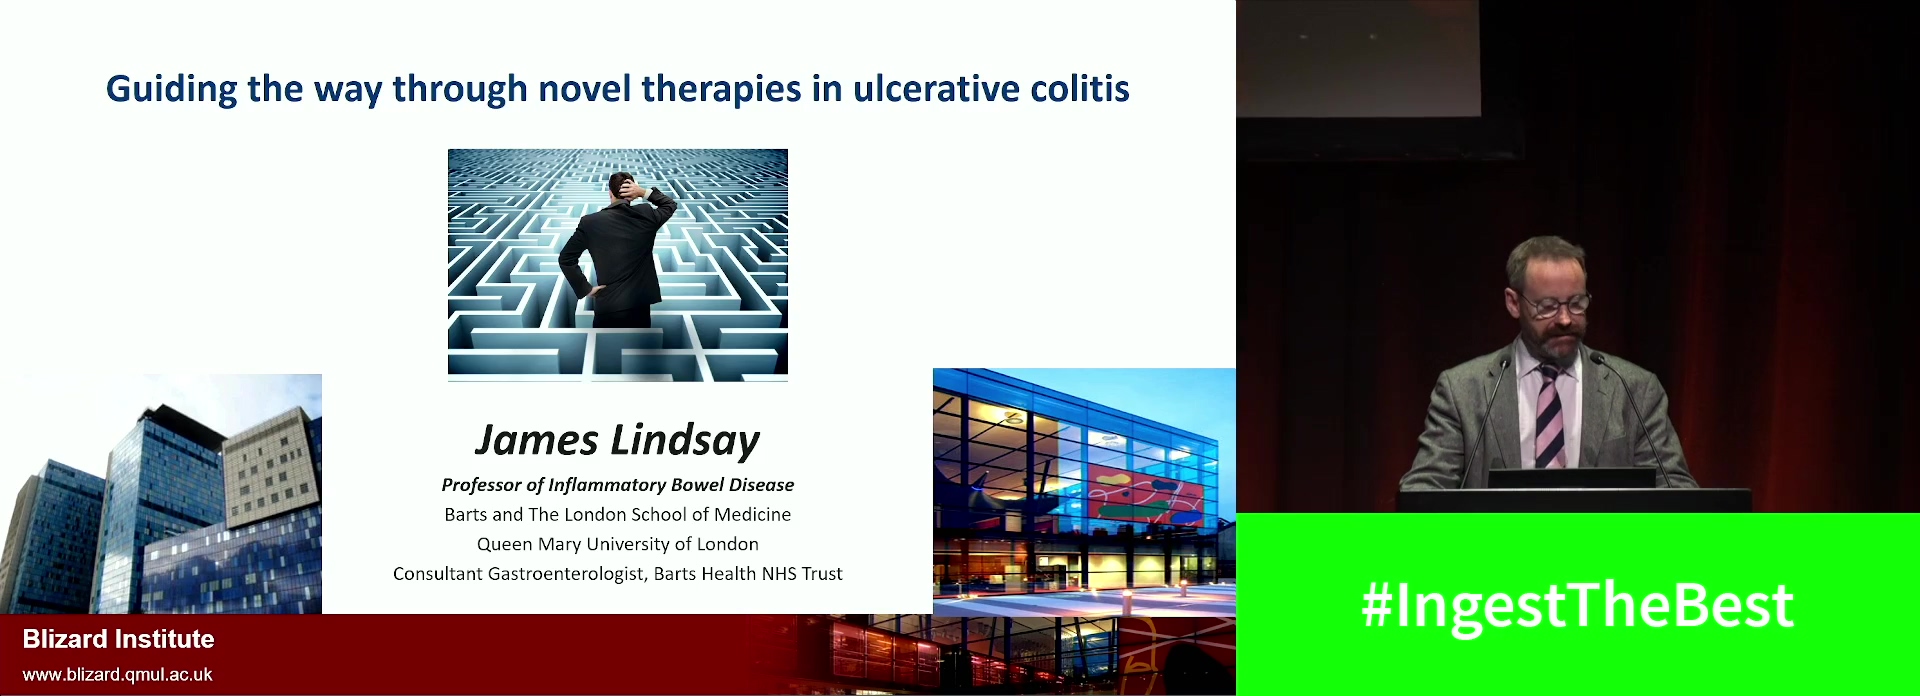 Guiding the way through novel therapies in ulcerative colitis